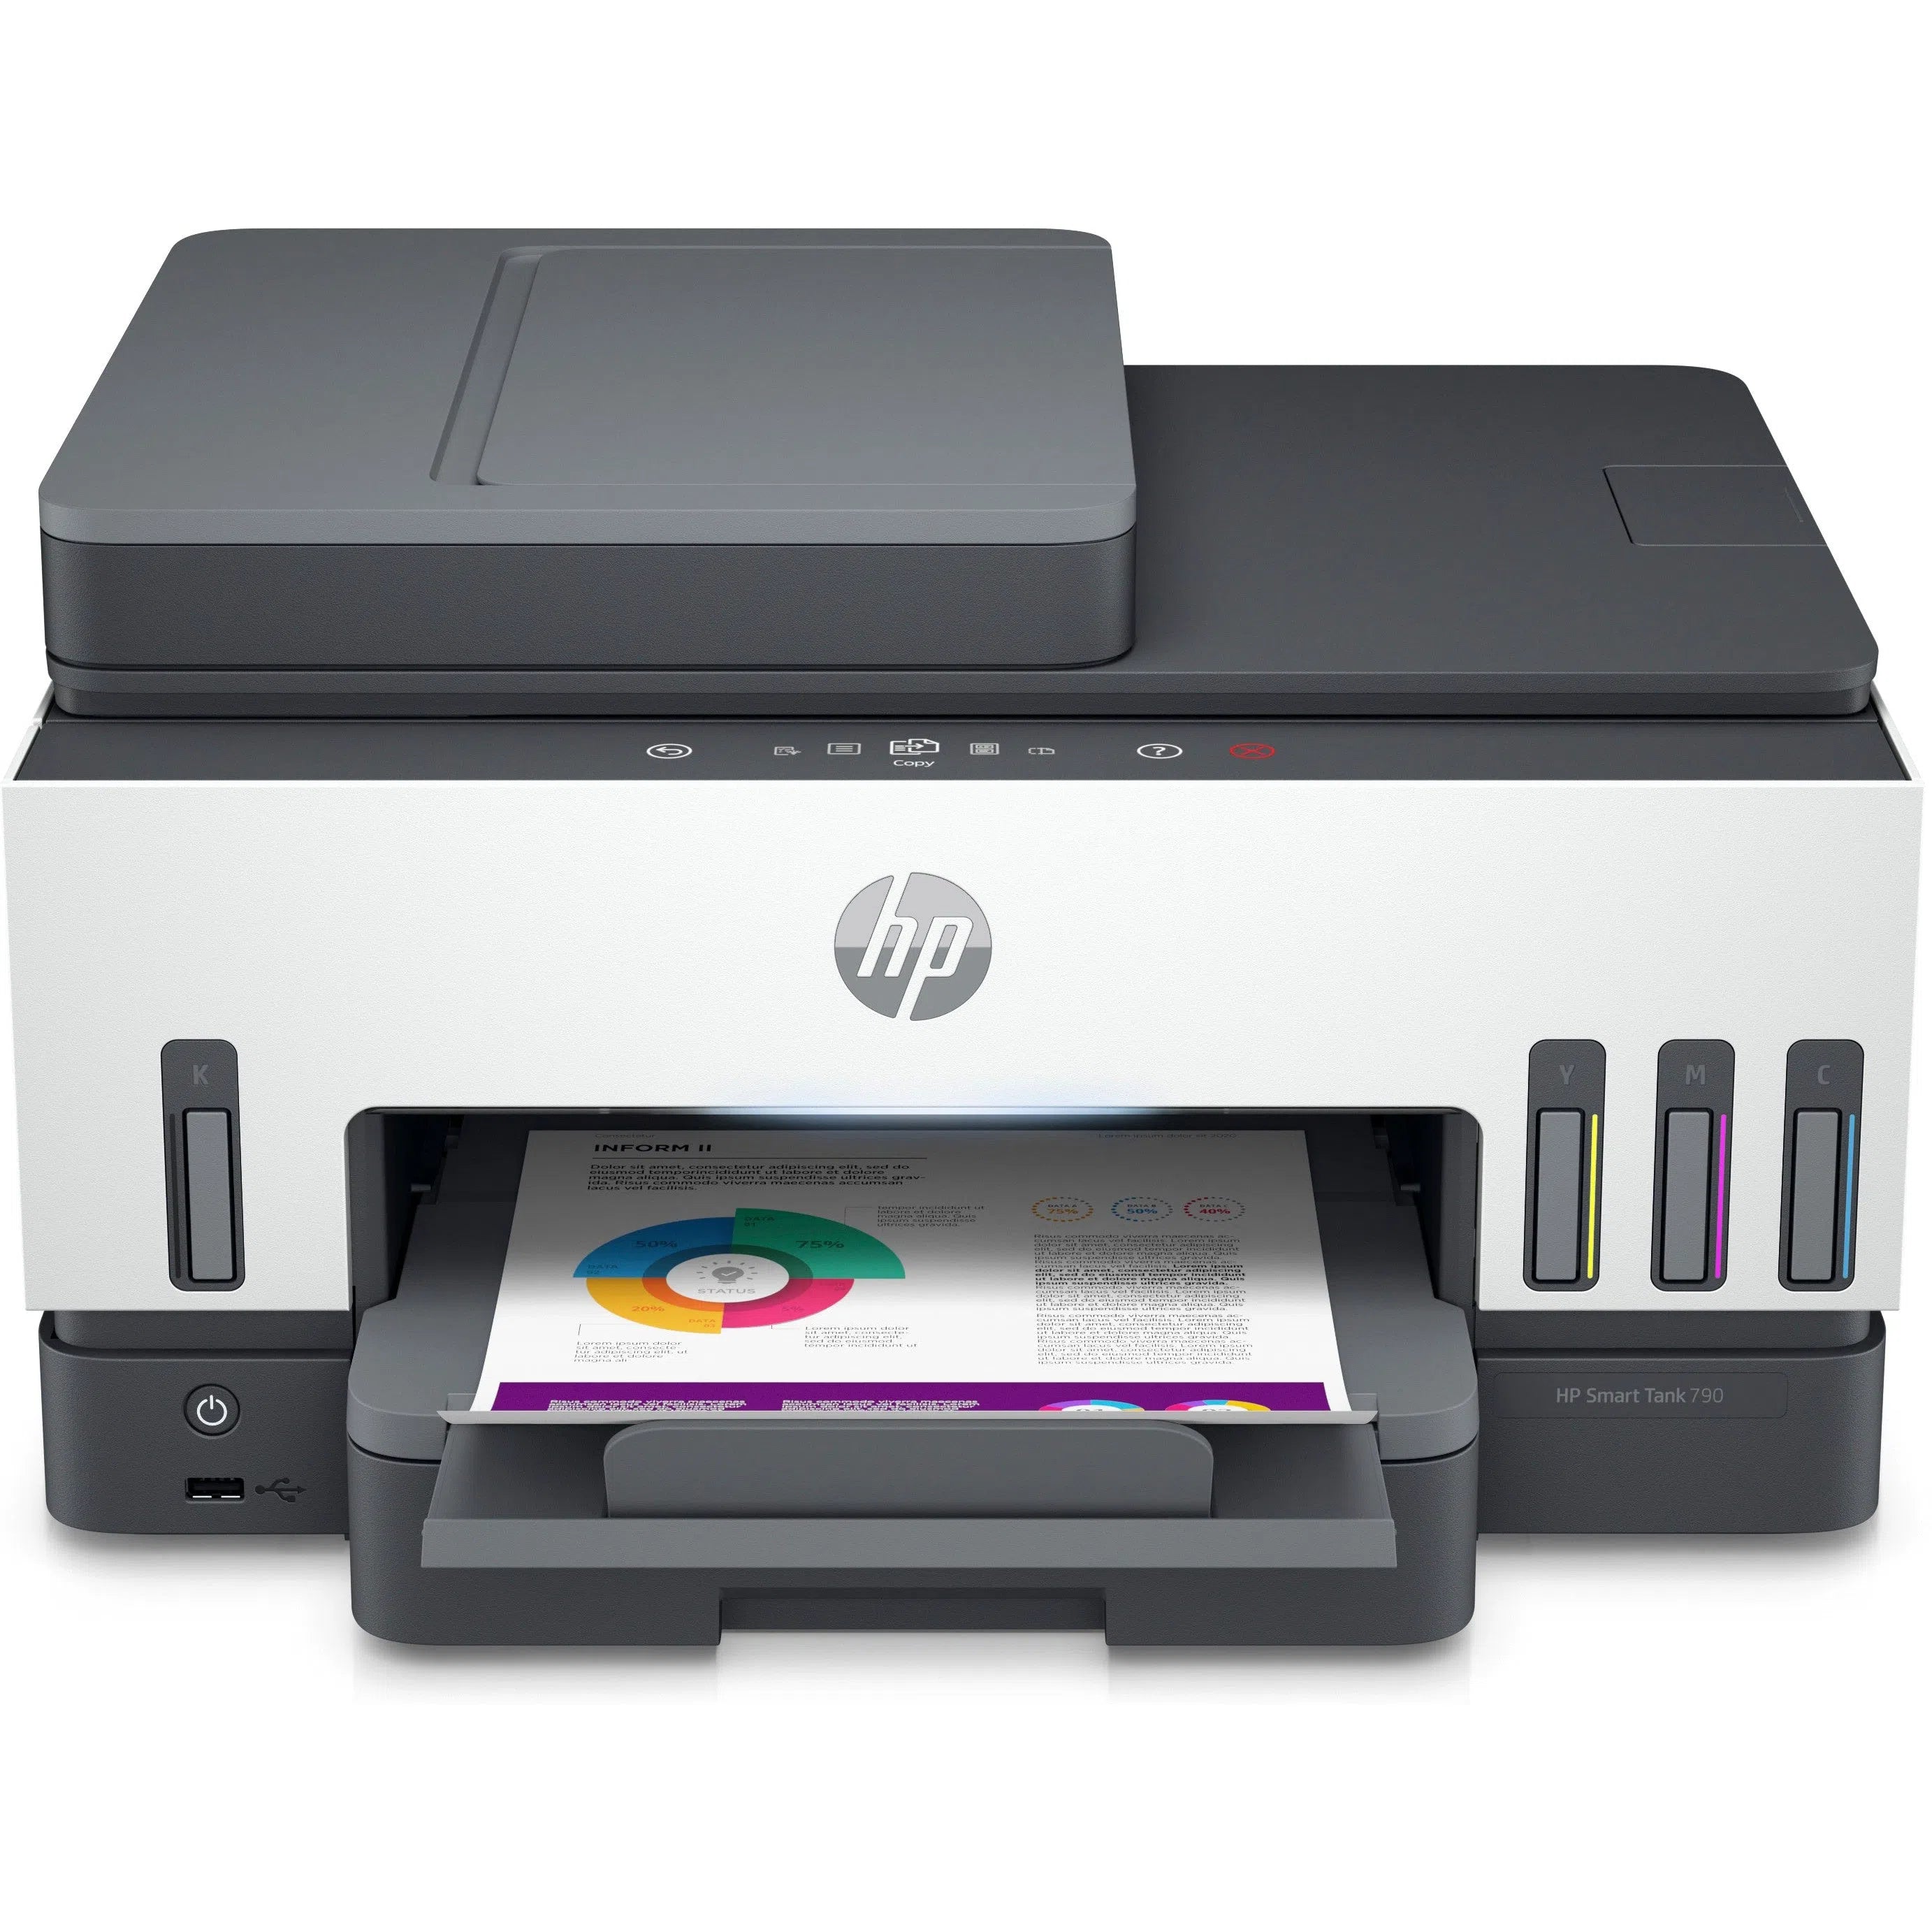 HP Smart Tank 790 A4 Ink; Print; Copy; Scan; Fax; ADF; Wireless; 5 ppm (black); 9 ppm (color). 1200 x 1200 rendered dpi